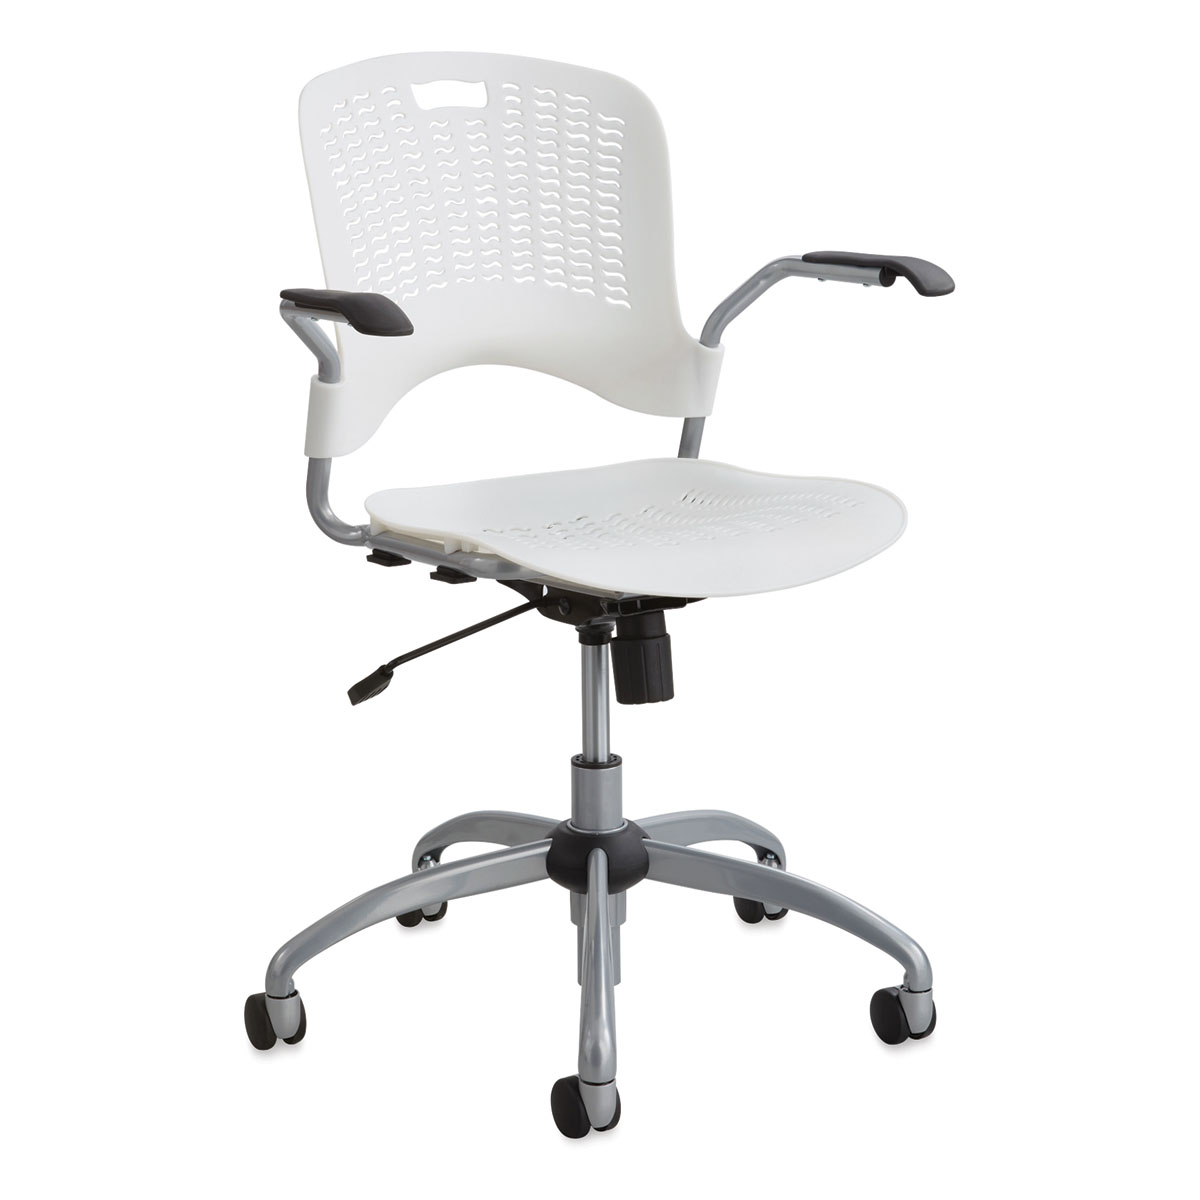 Safco Sassy Manager Swivel Chair - White